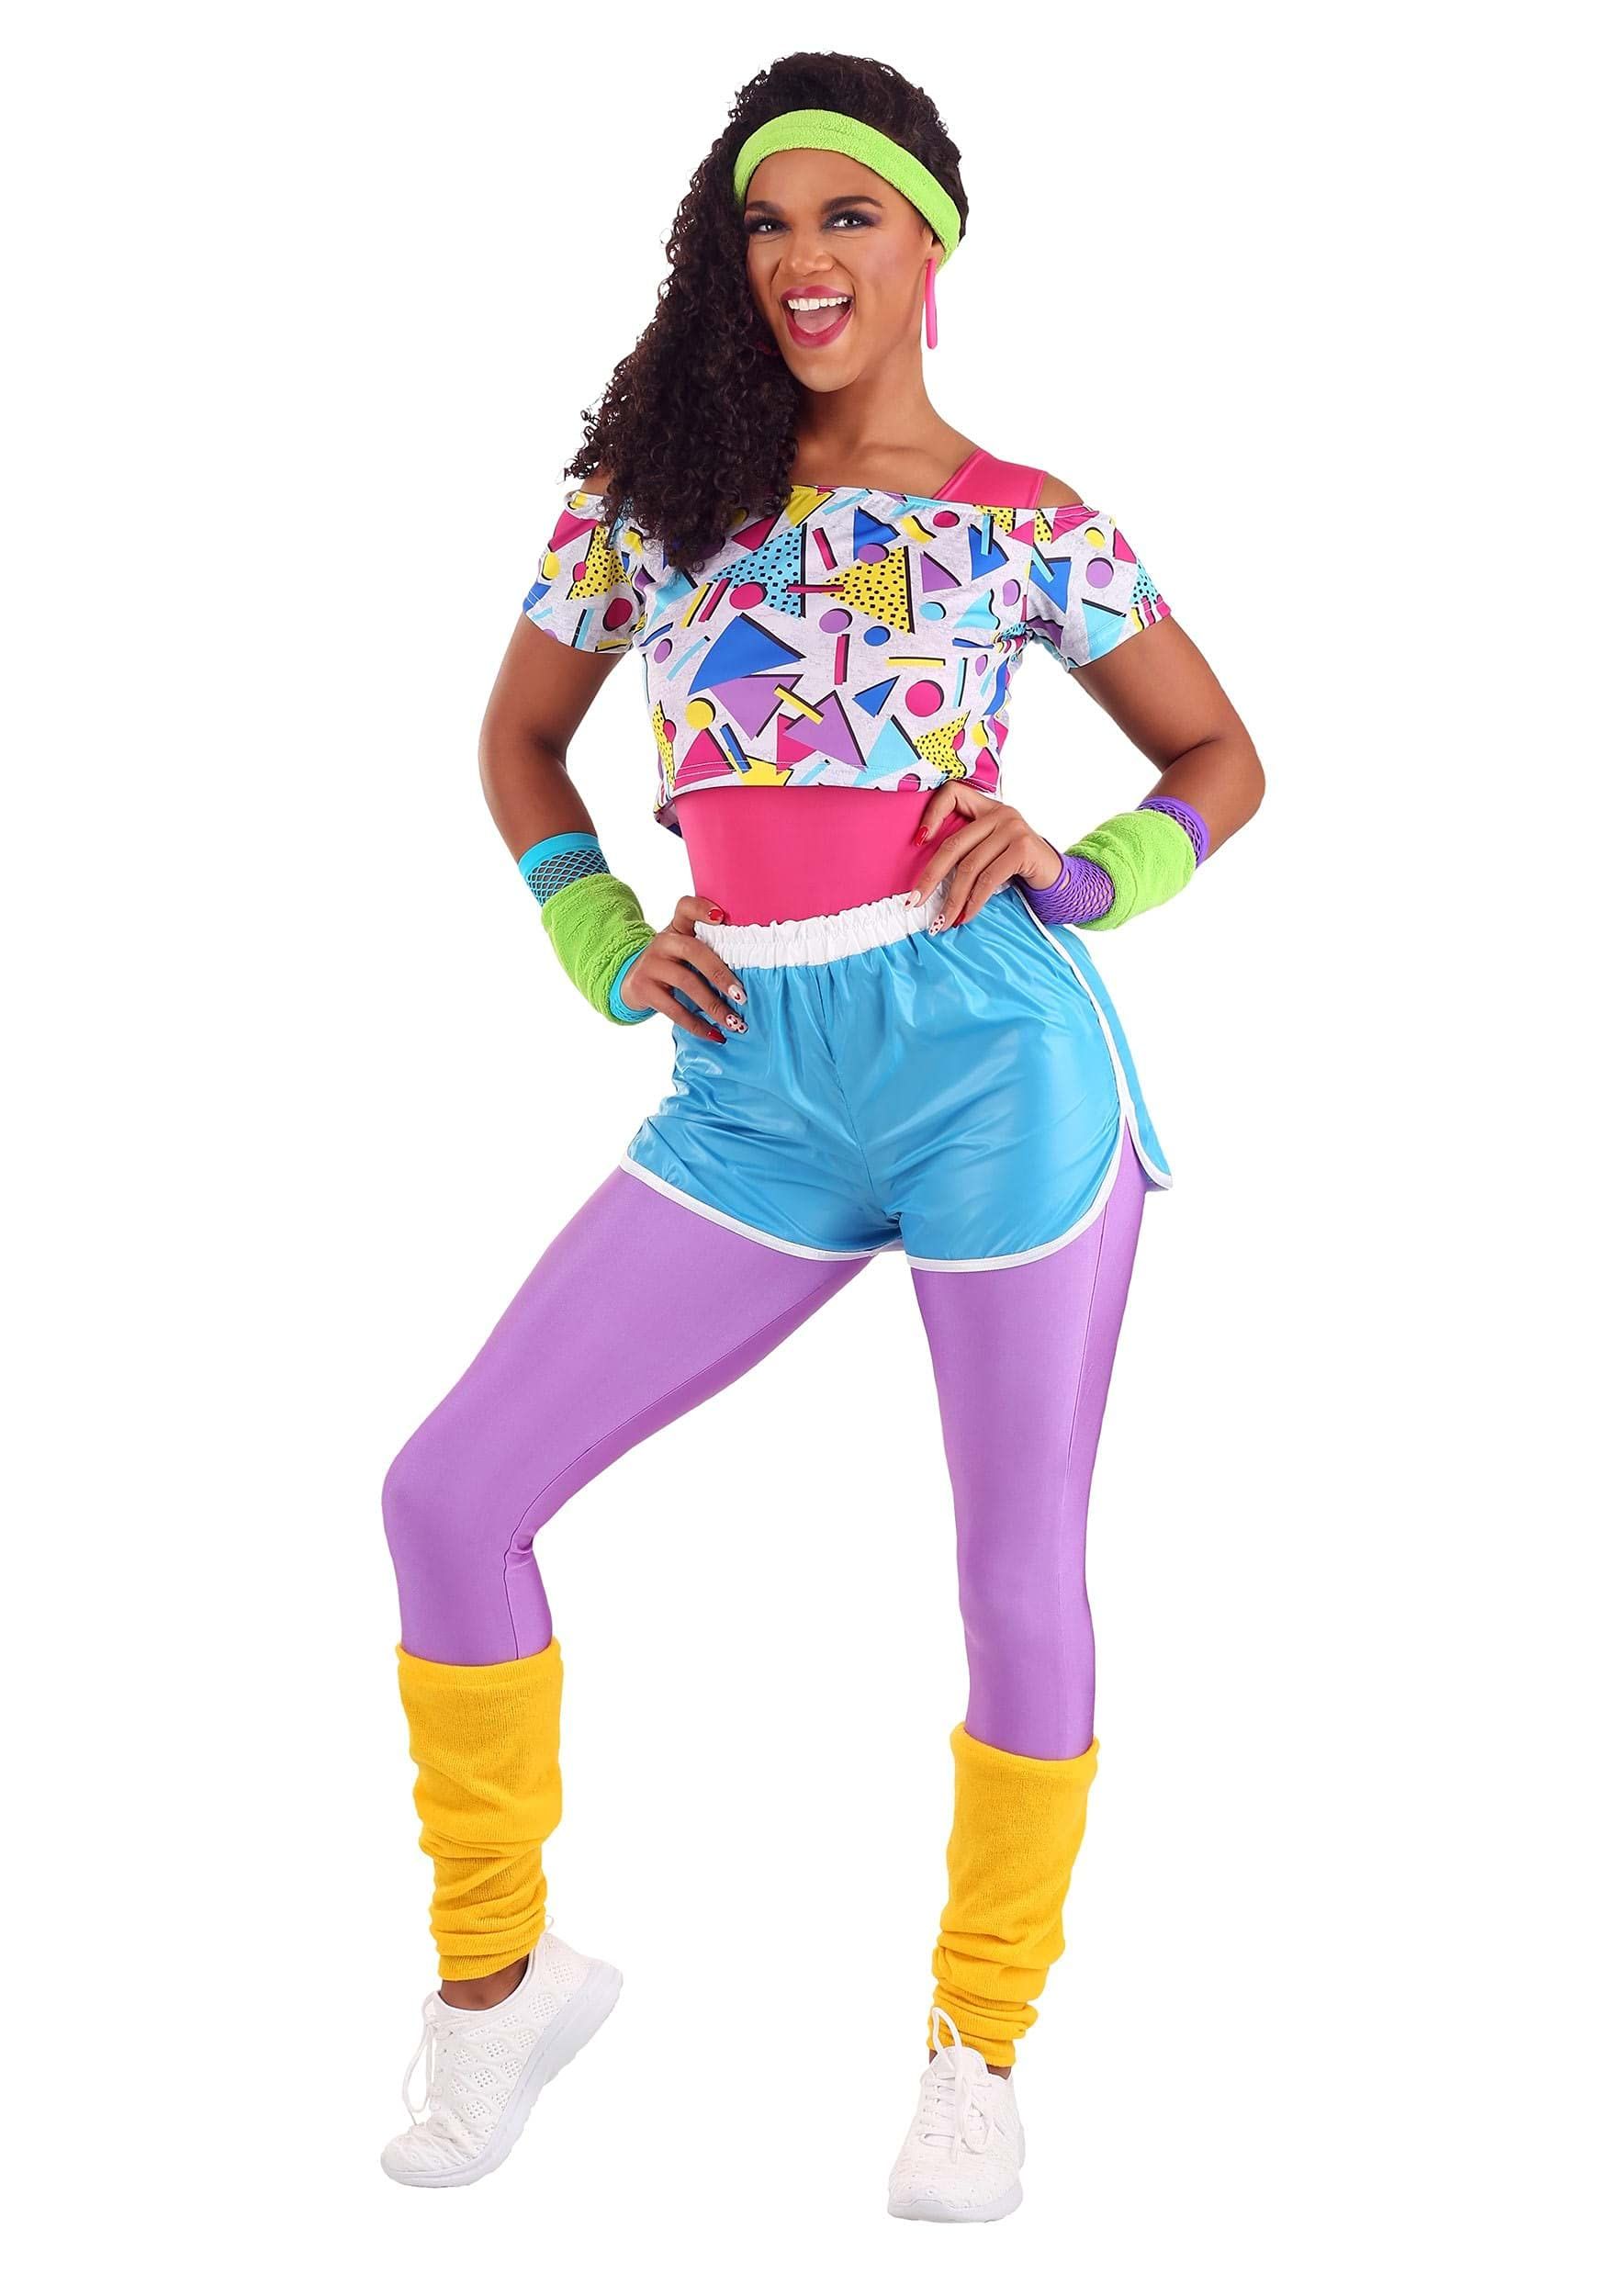 dress up for the 80s